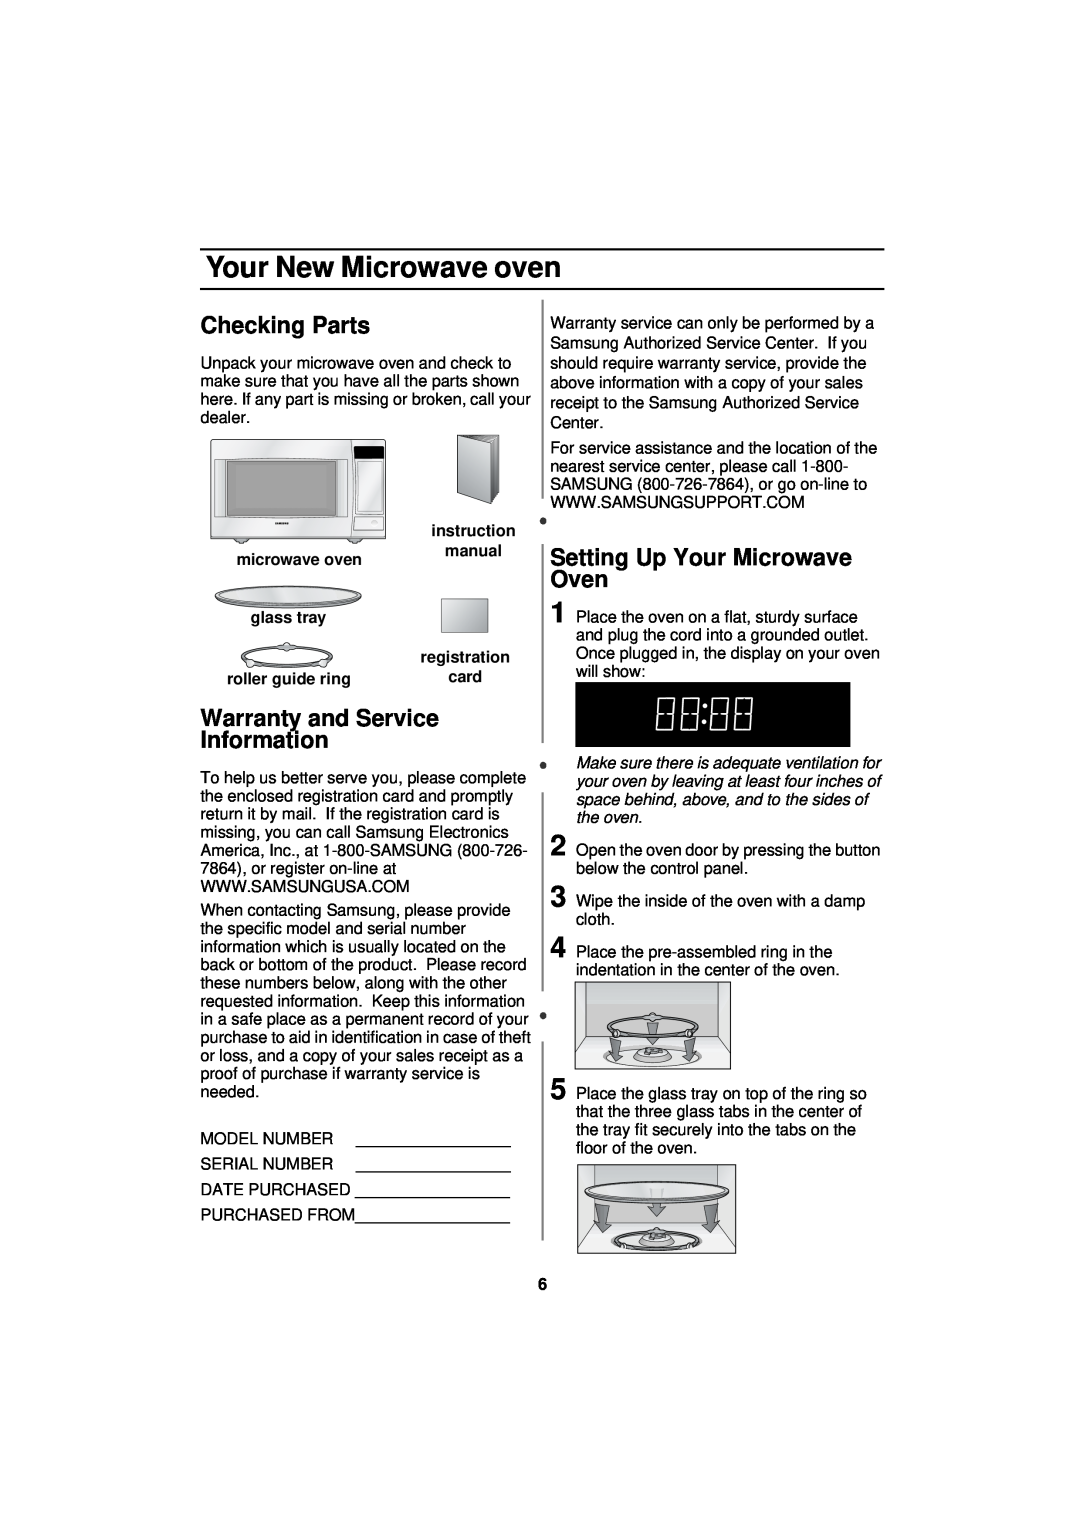 Samsung DE68-01931A-01 manual Your New Microwave oven, Checking Parts, Warranty and Service Information 